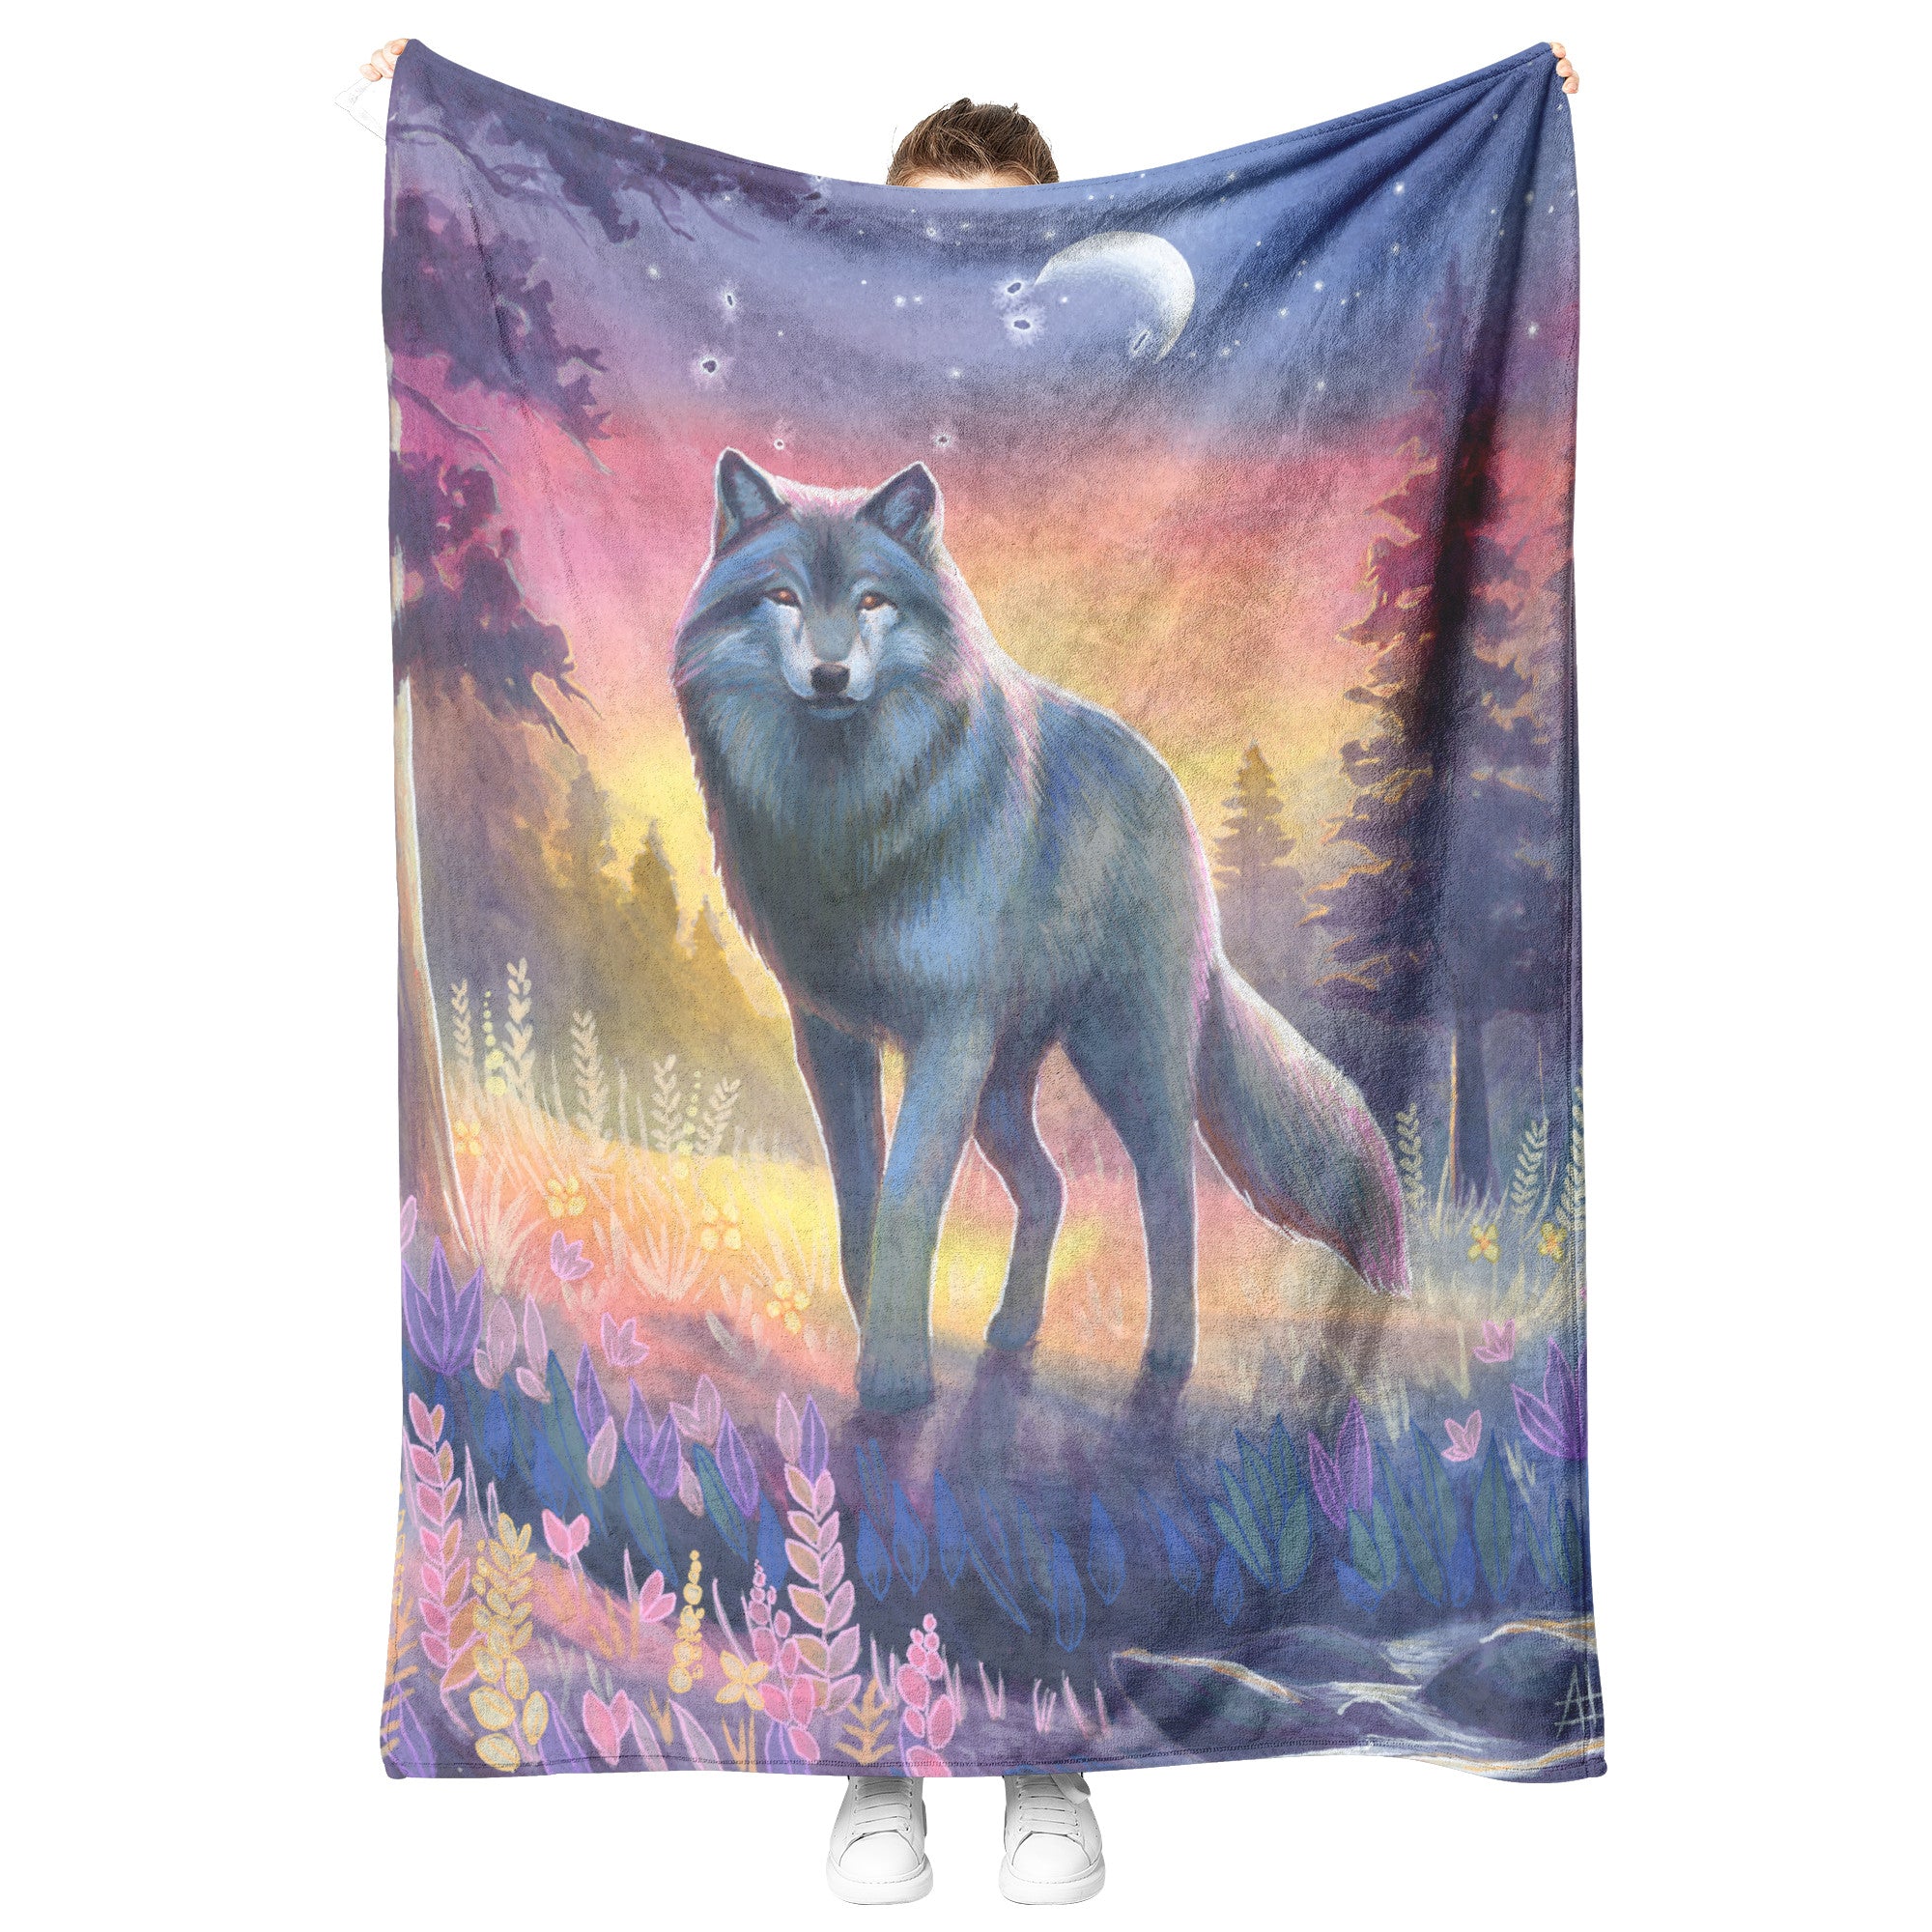 A person holds a Wolf Blanket featuring a vivid illustration of a wolf in a colorful forest under a twilight sky with a crescent moon.